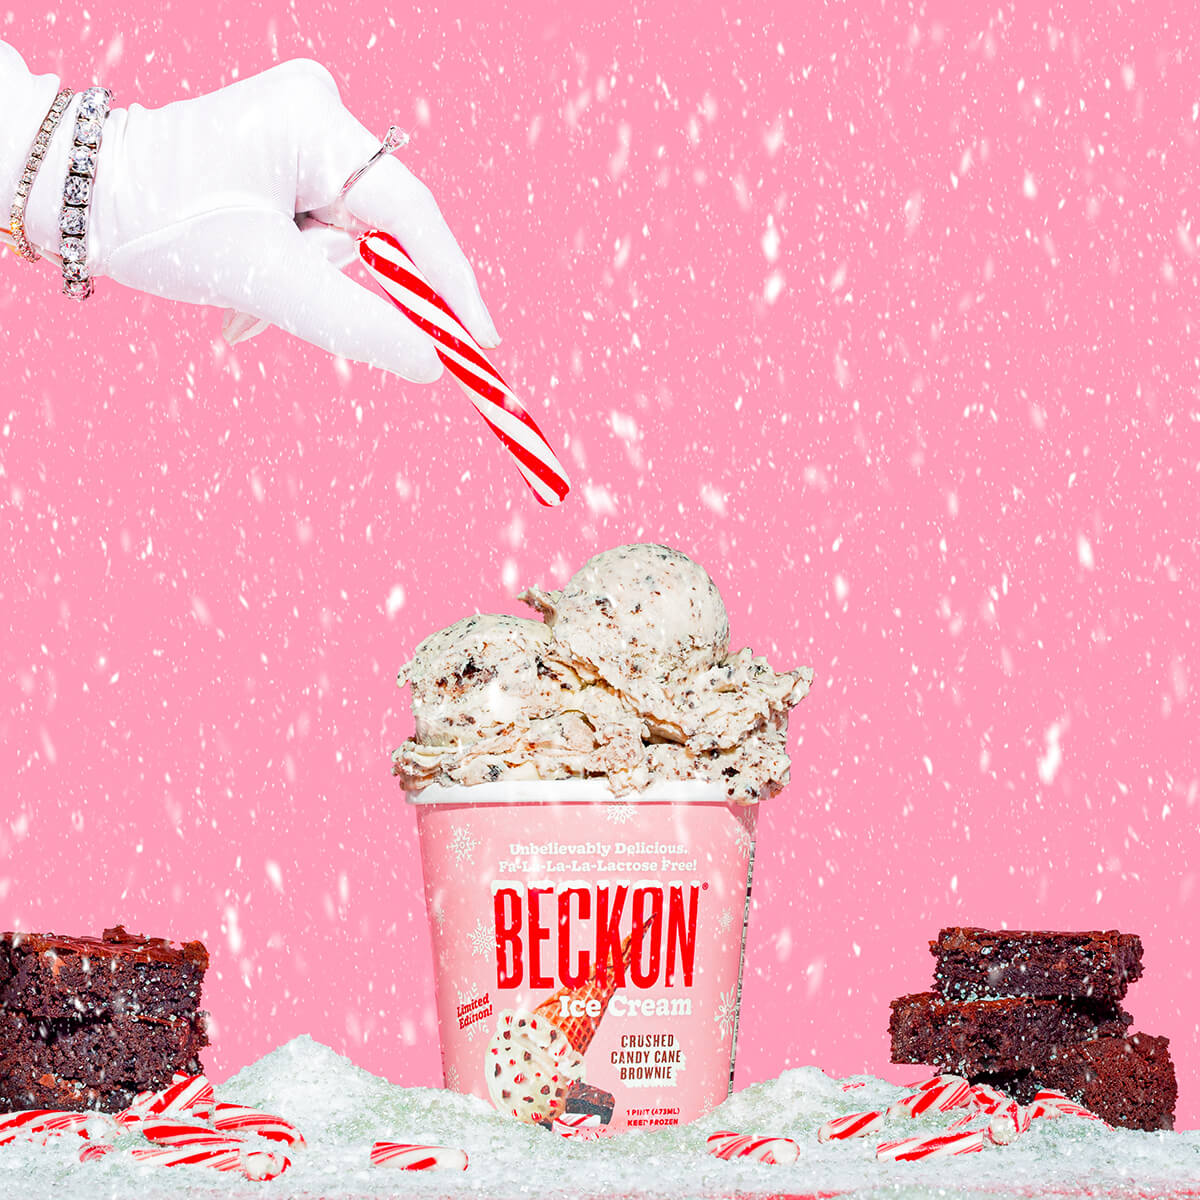 beckon ice cream lactose free crushed candy cane brownie